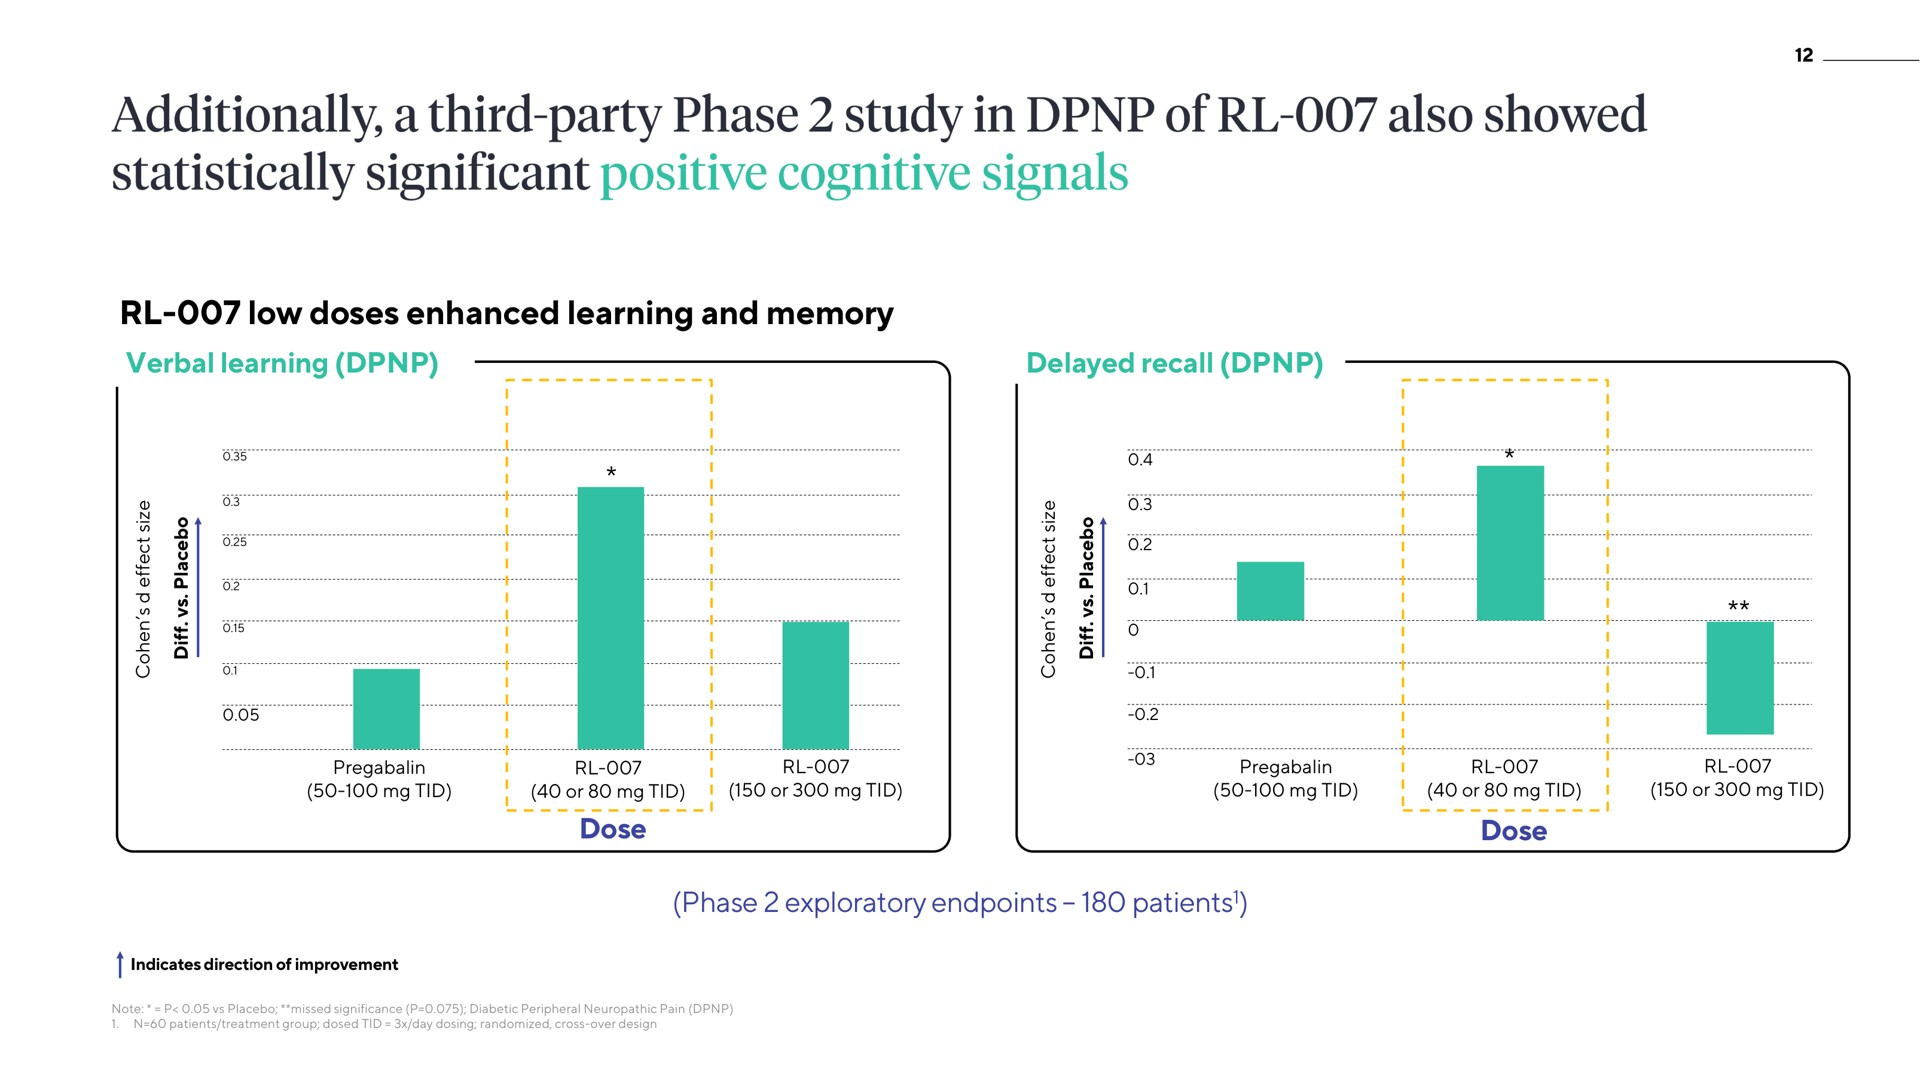 dose low doses enhanced learning and memory verbal learning delayed recall dose phase exploratory patients additionally a third party study in of also showed statistically significant positive cognitive signals | ATAI